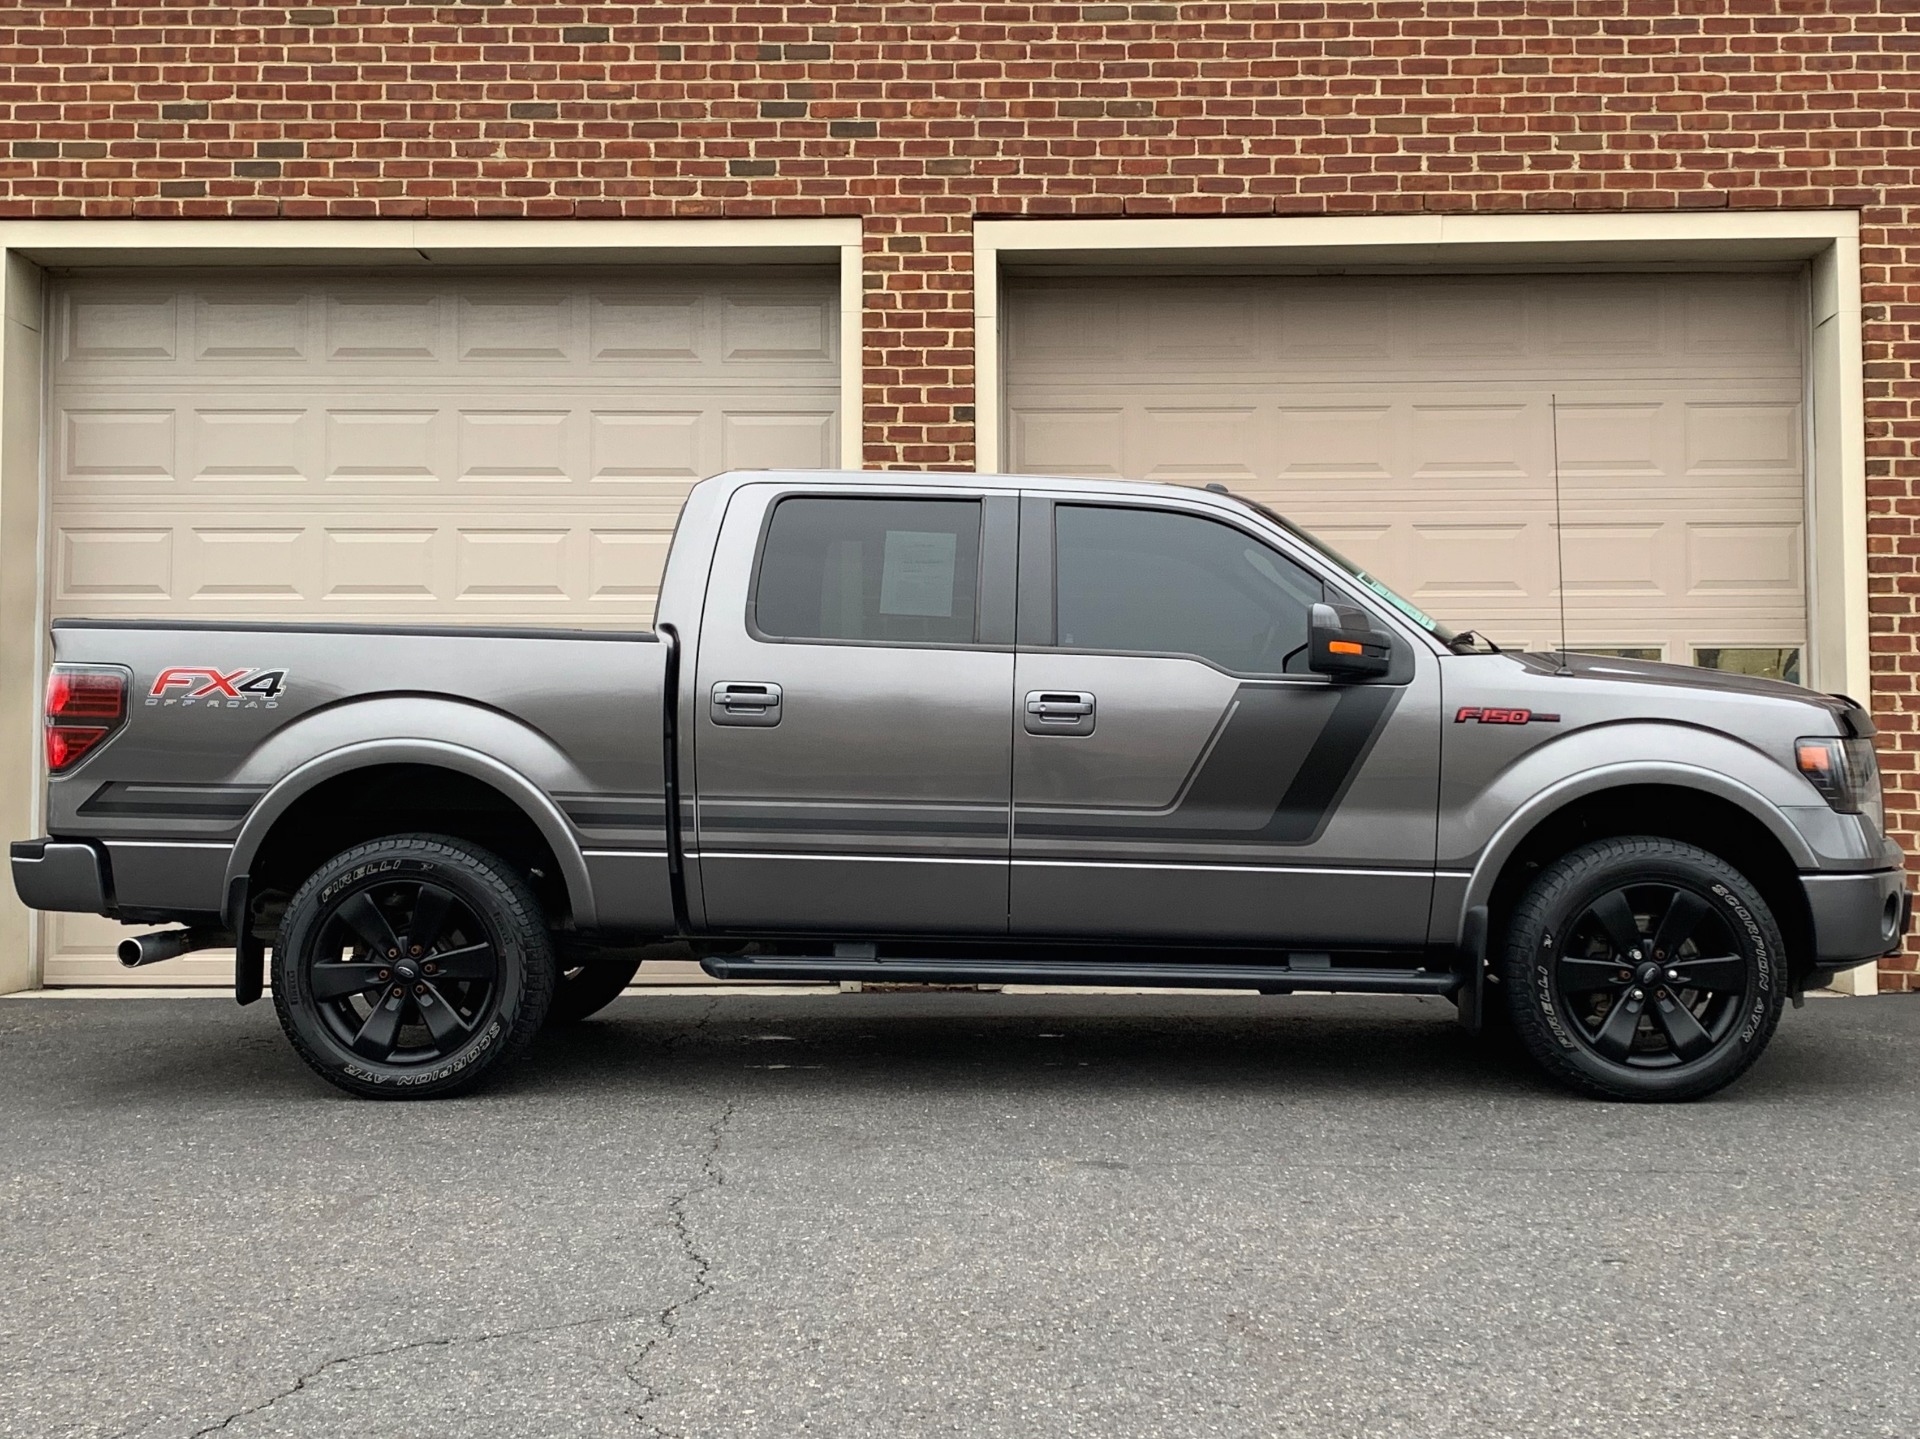 2014 Ford F 150 Fx4 Appearance Package Stock C44611 For Sale Near